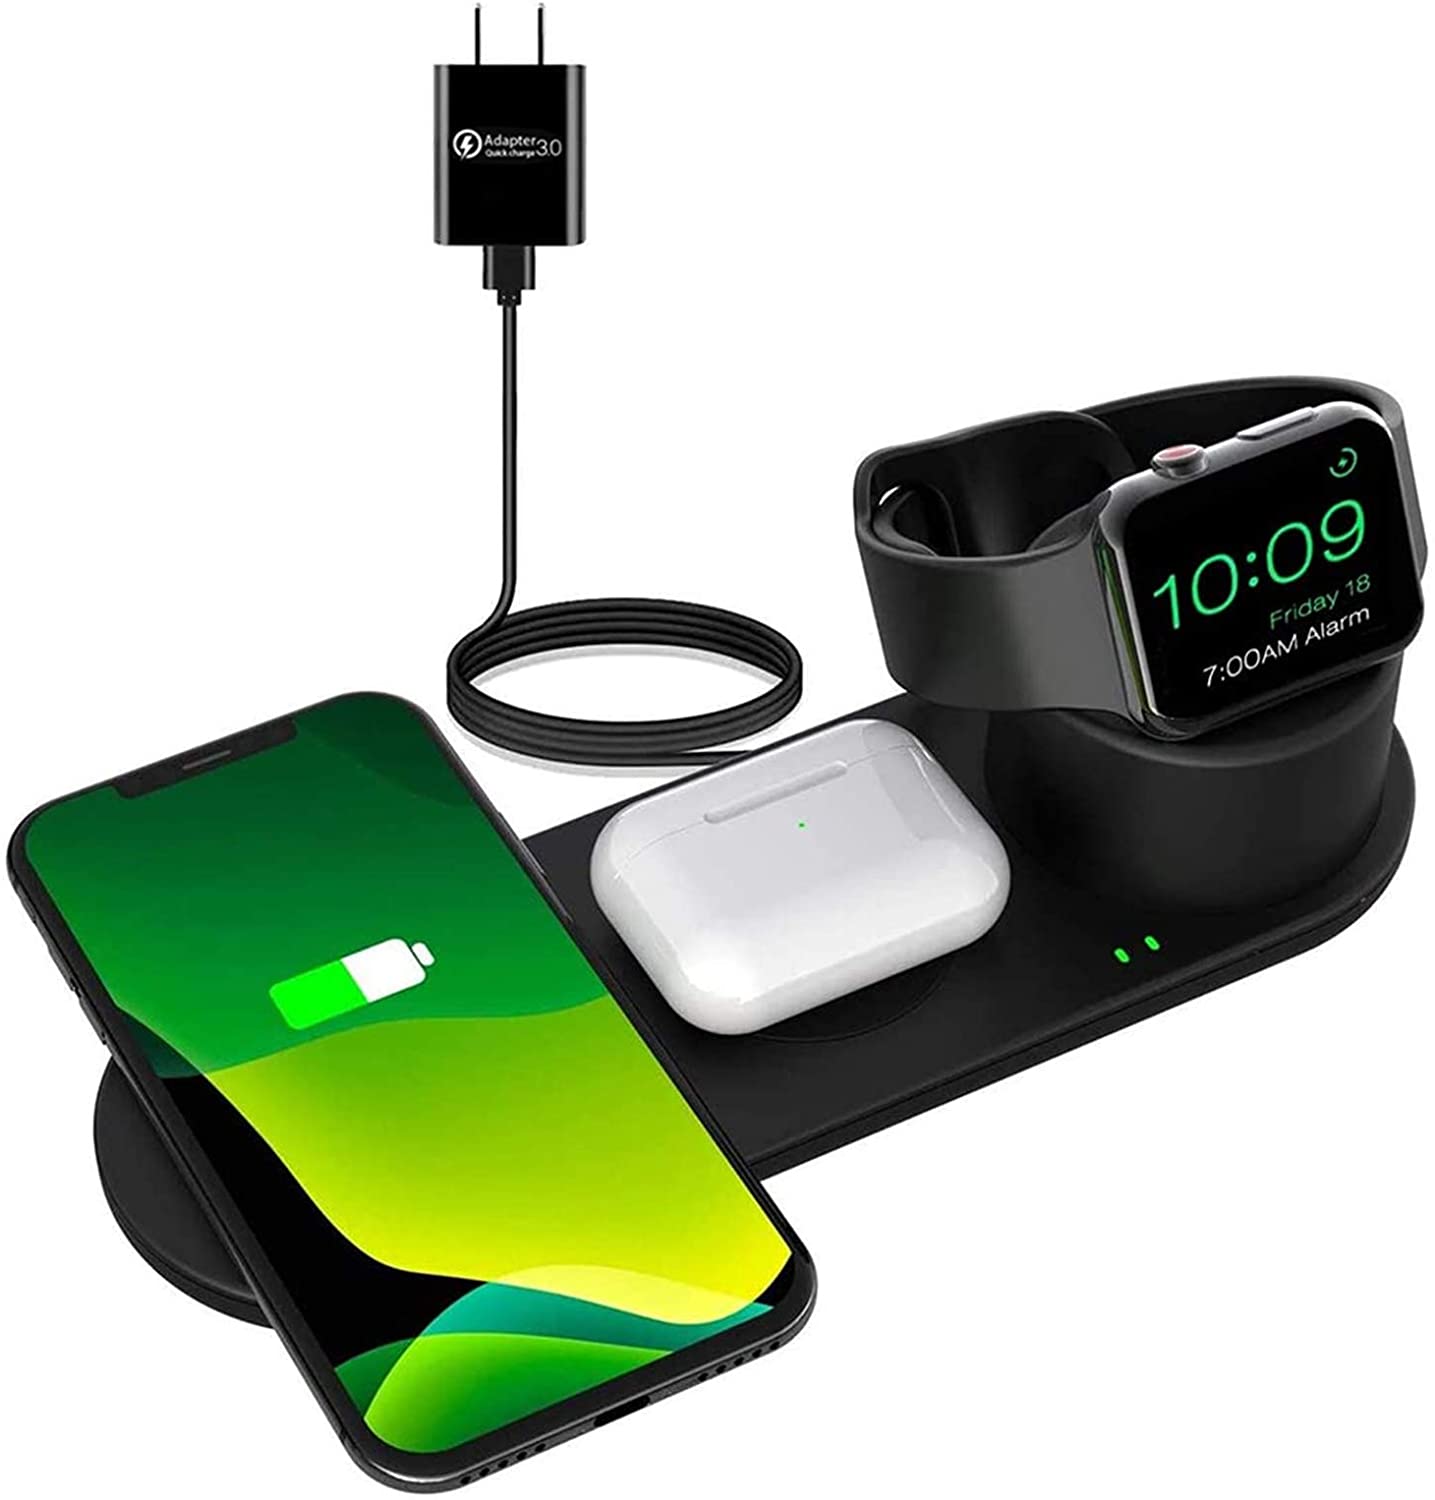 Aresh 3-In-1 Wireless Charging Pad